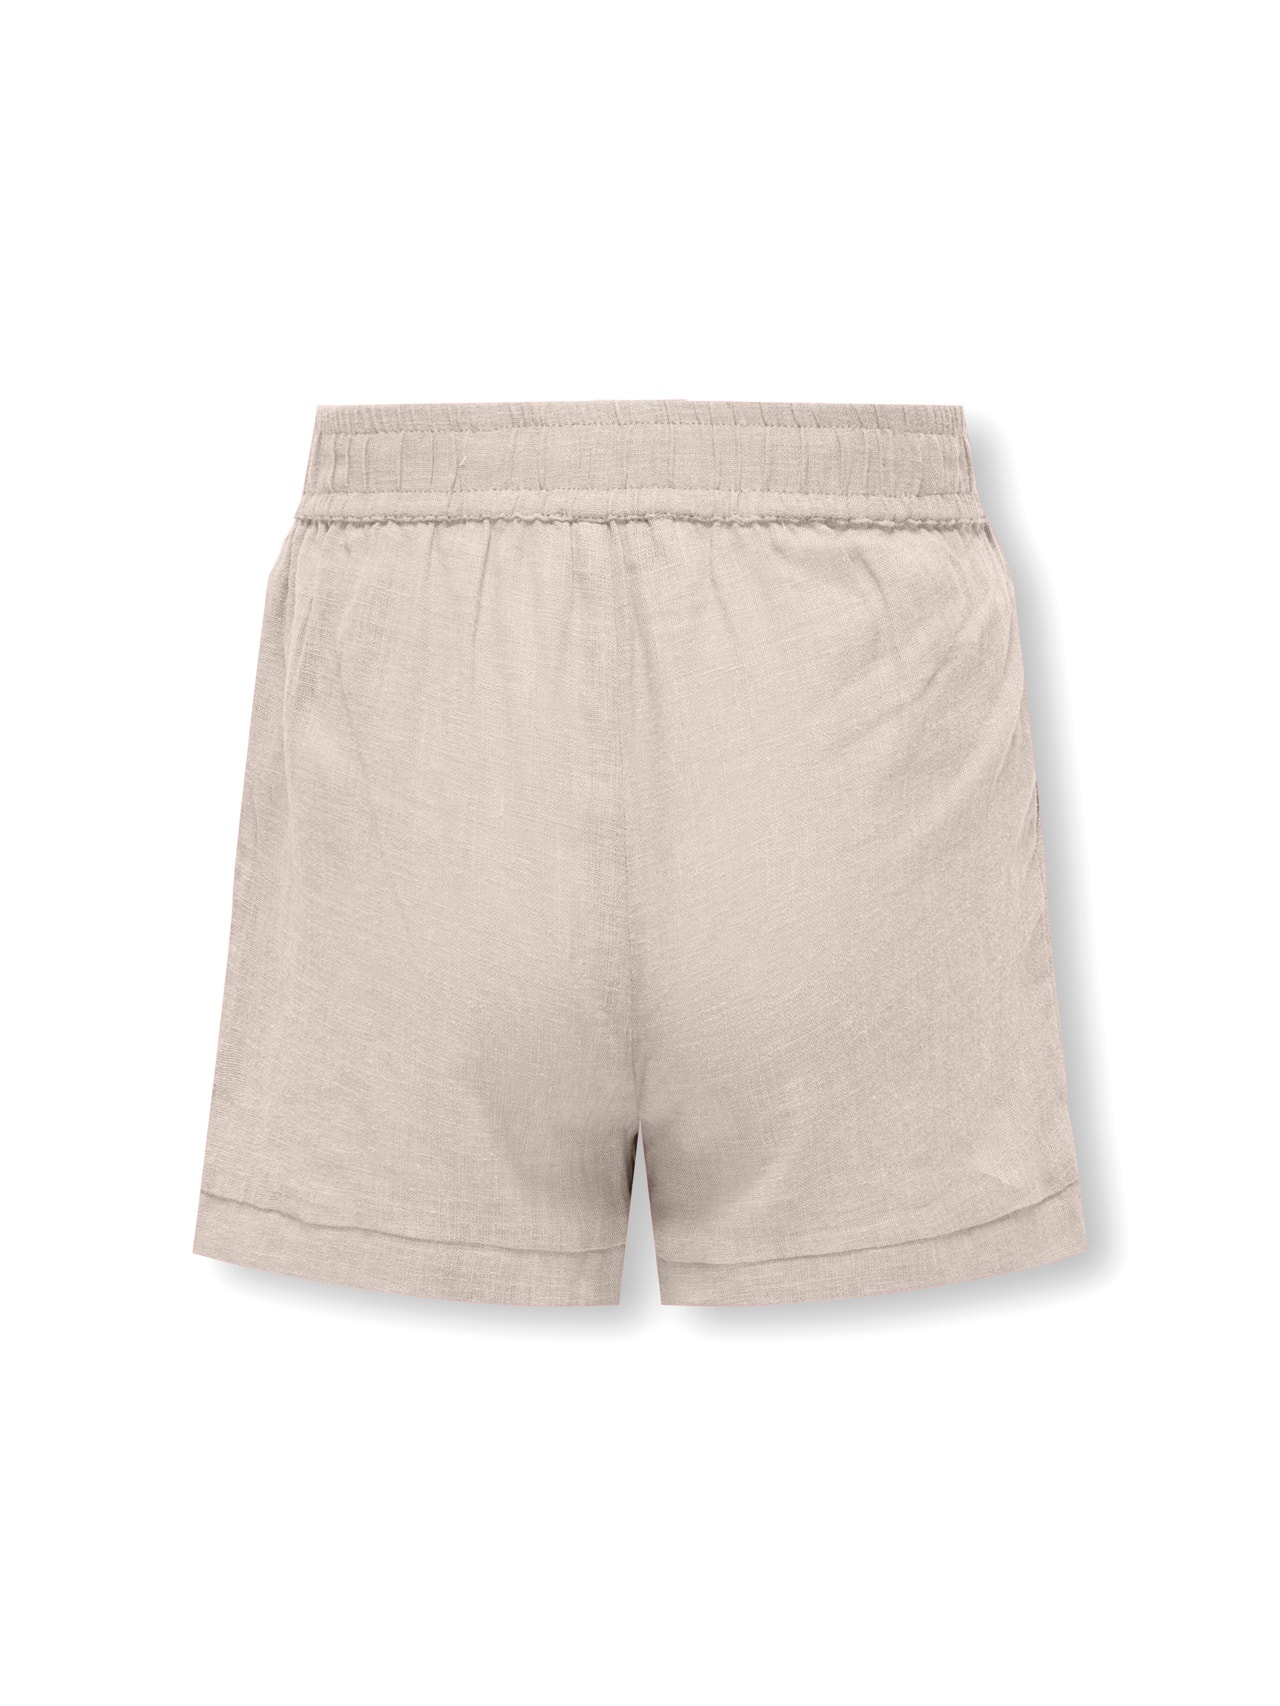 ONLY Shorts Regular Fit -Pumice Stone - 15325755